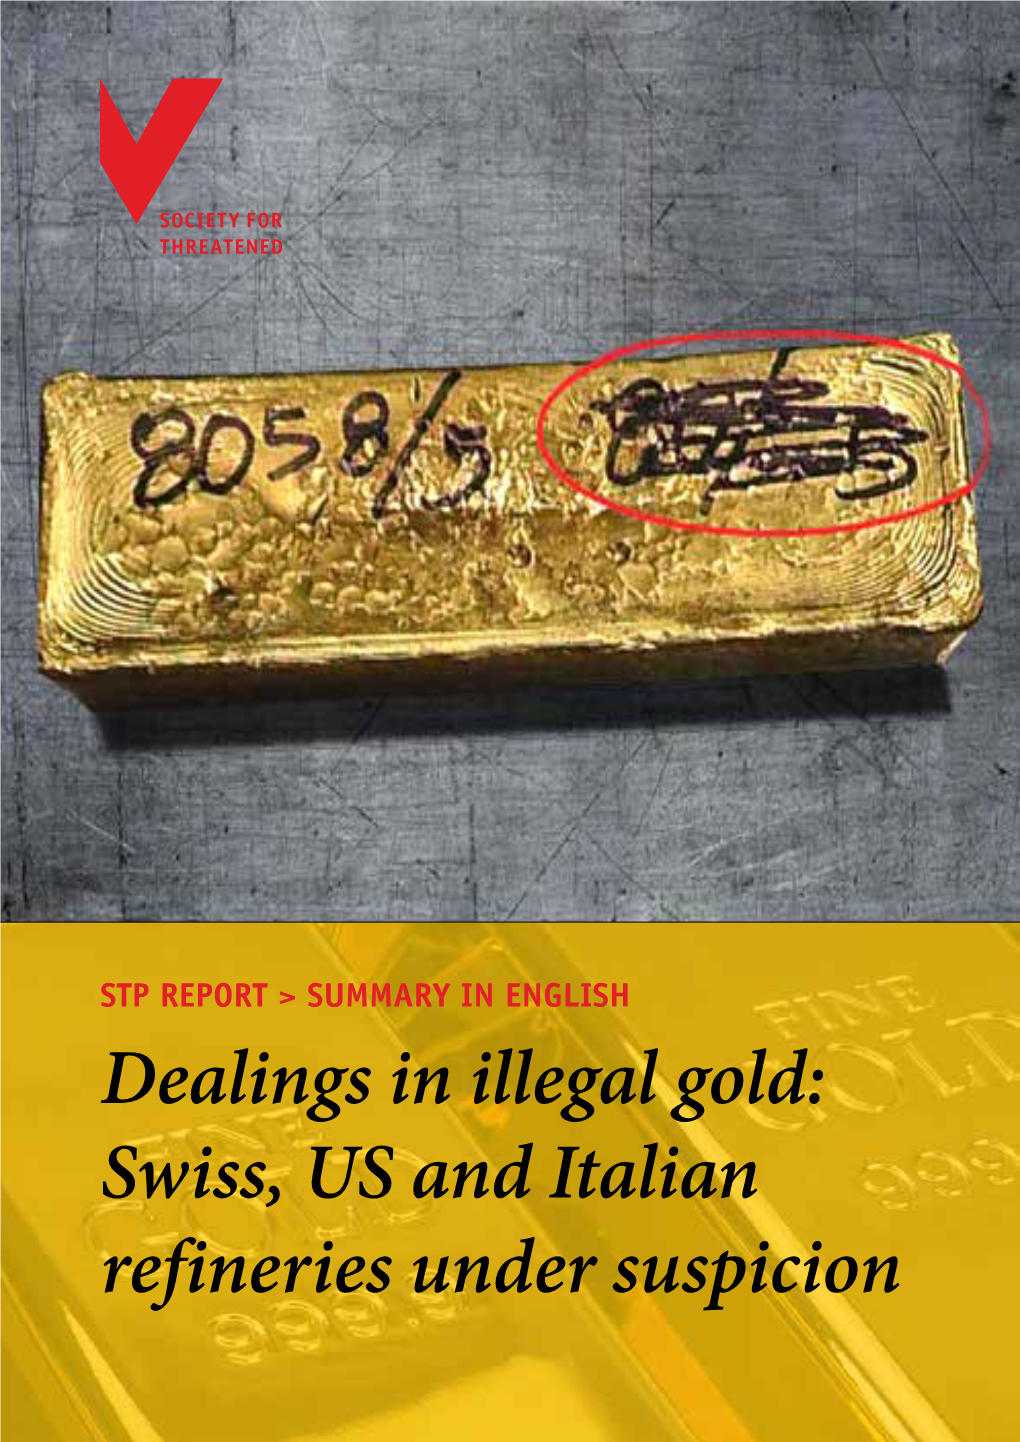 Dealings in Illegal Gold: Swiss, US and Italian Refineries Under Suspicion 2> SUMMARY